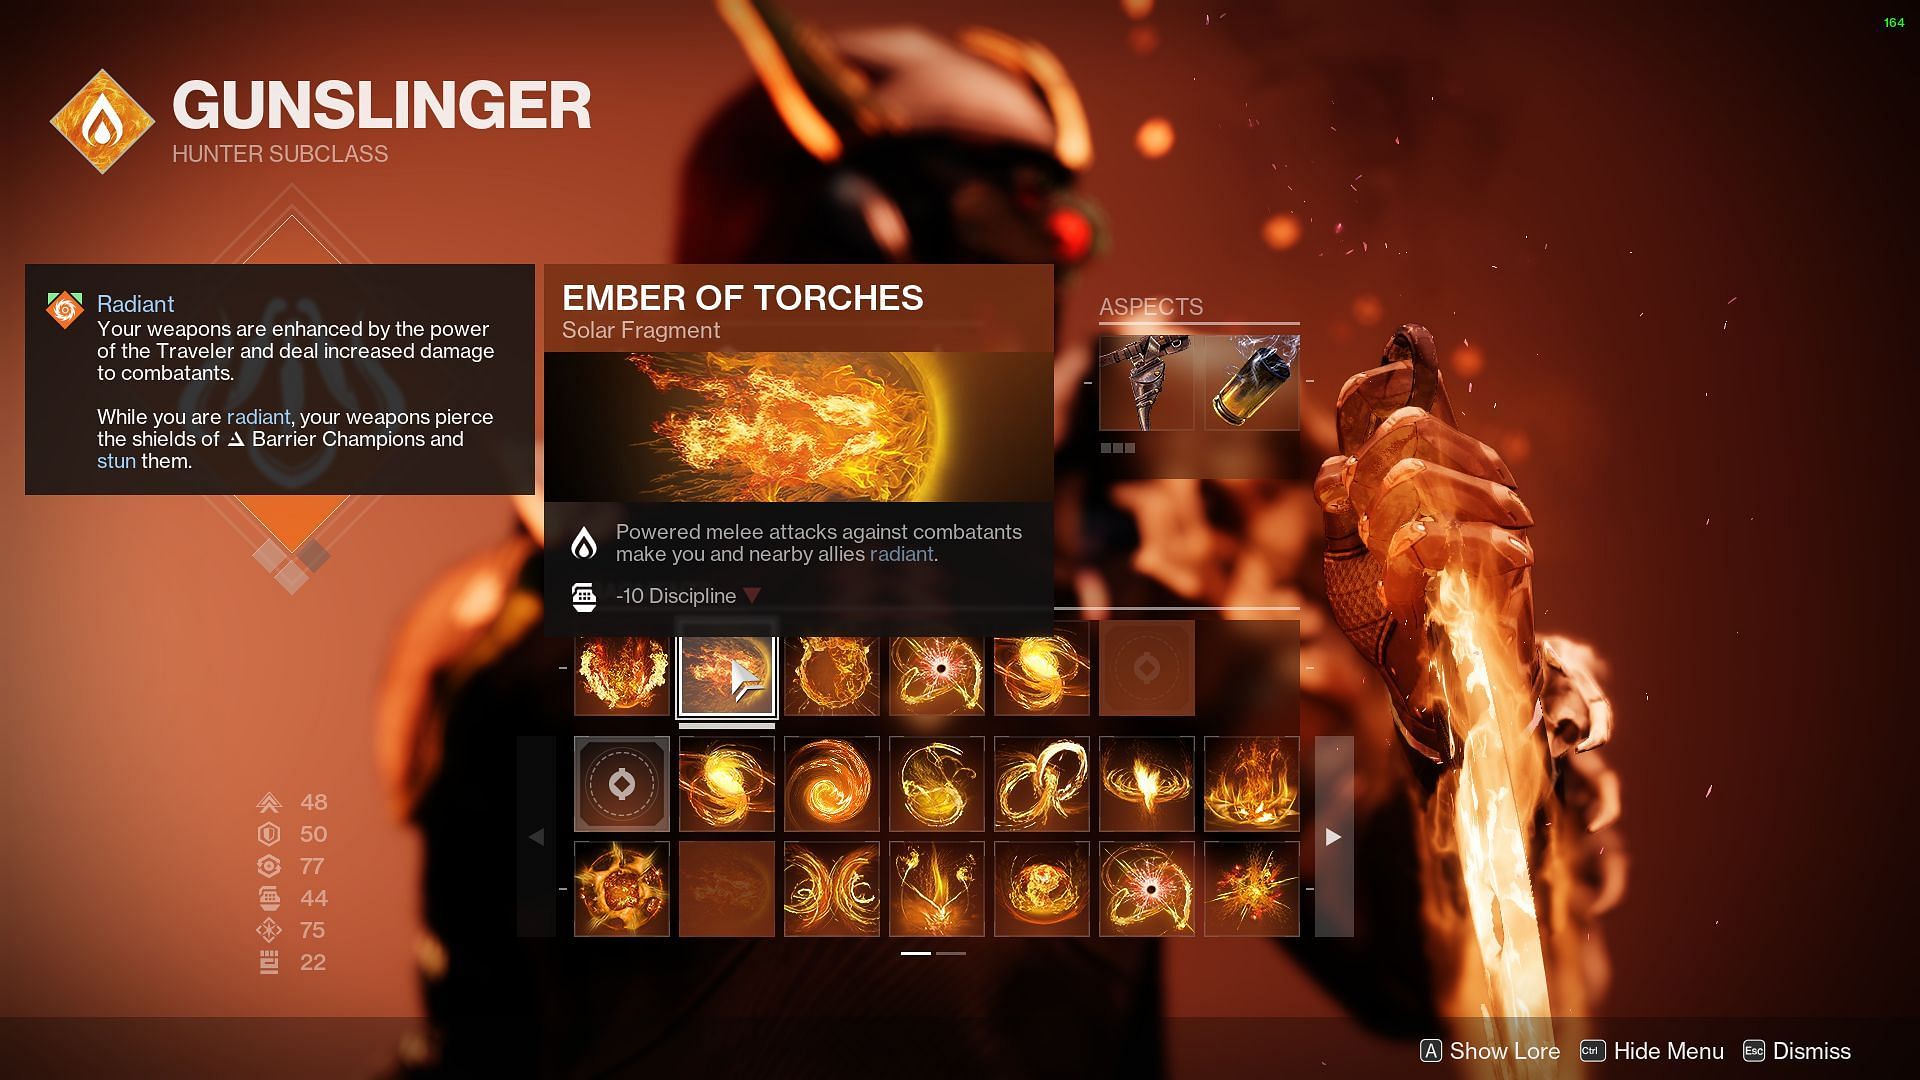 Ember of Torches Fragment (Image via Bungie)